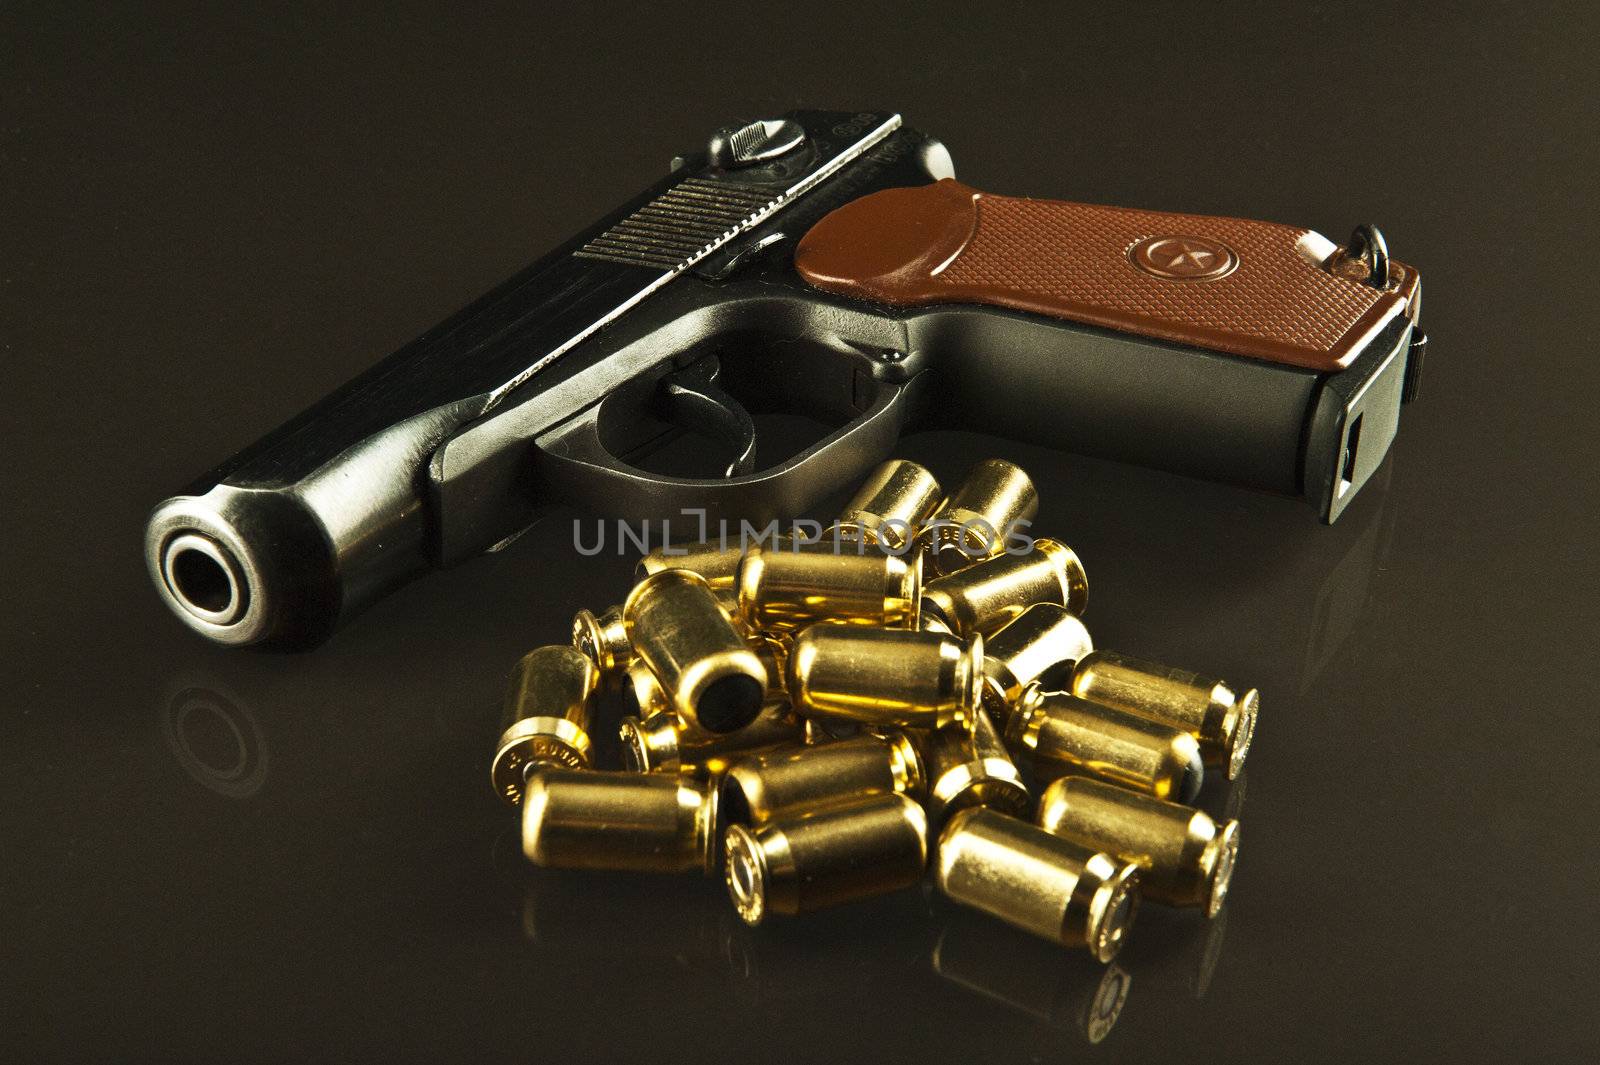 A gun and lots of bullets on a glass table over a dark background